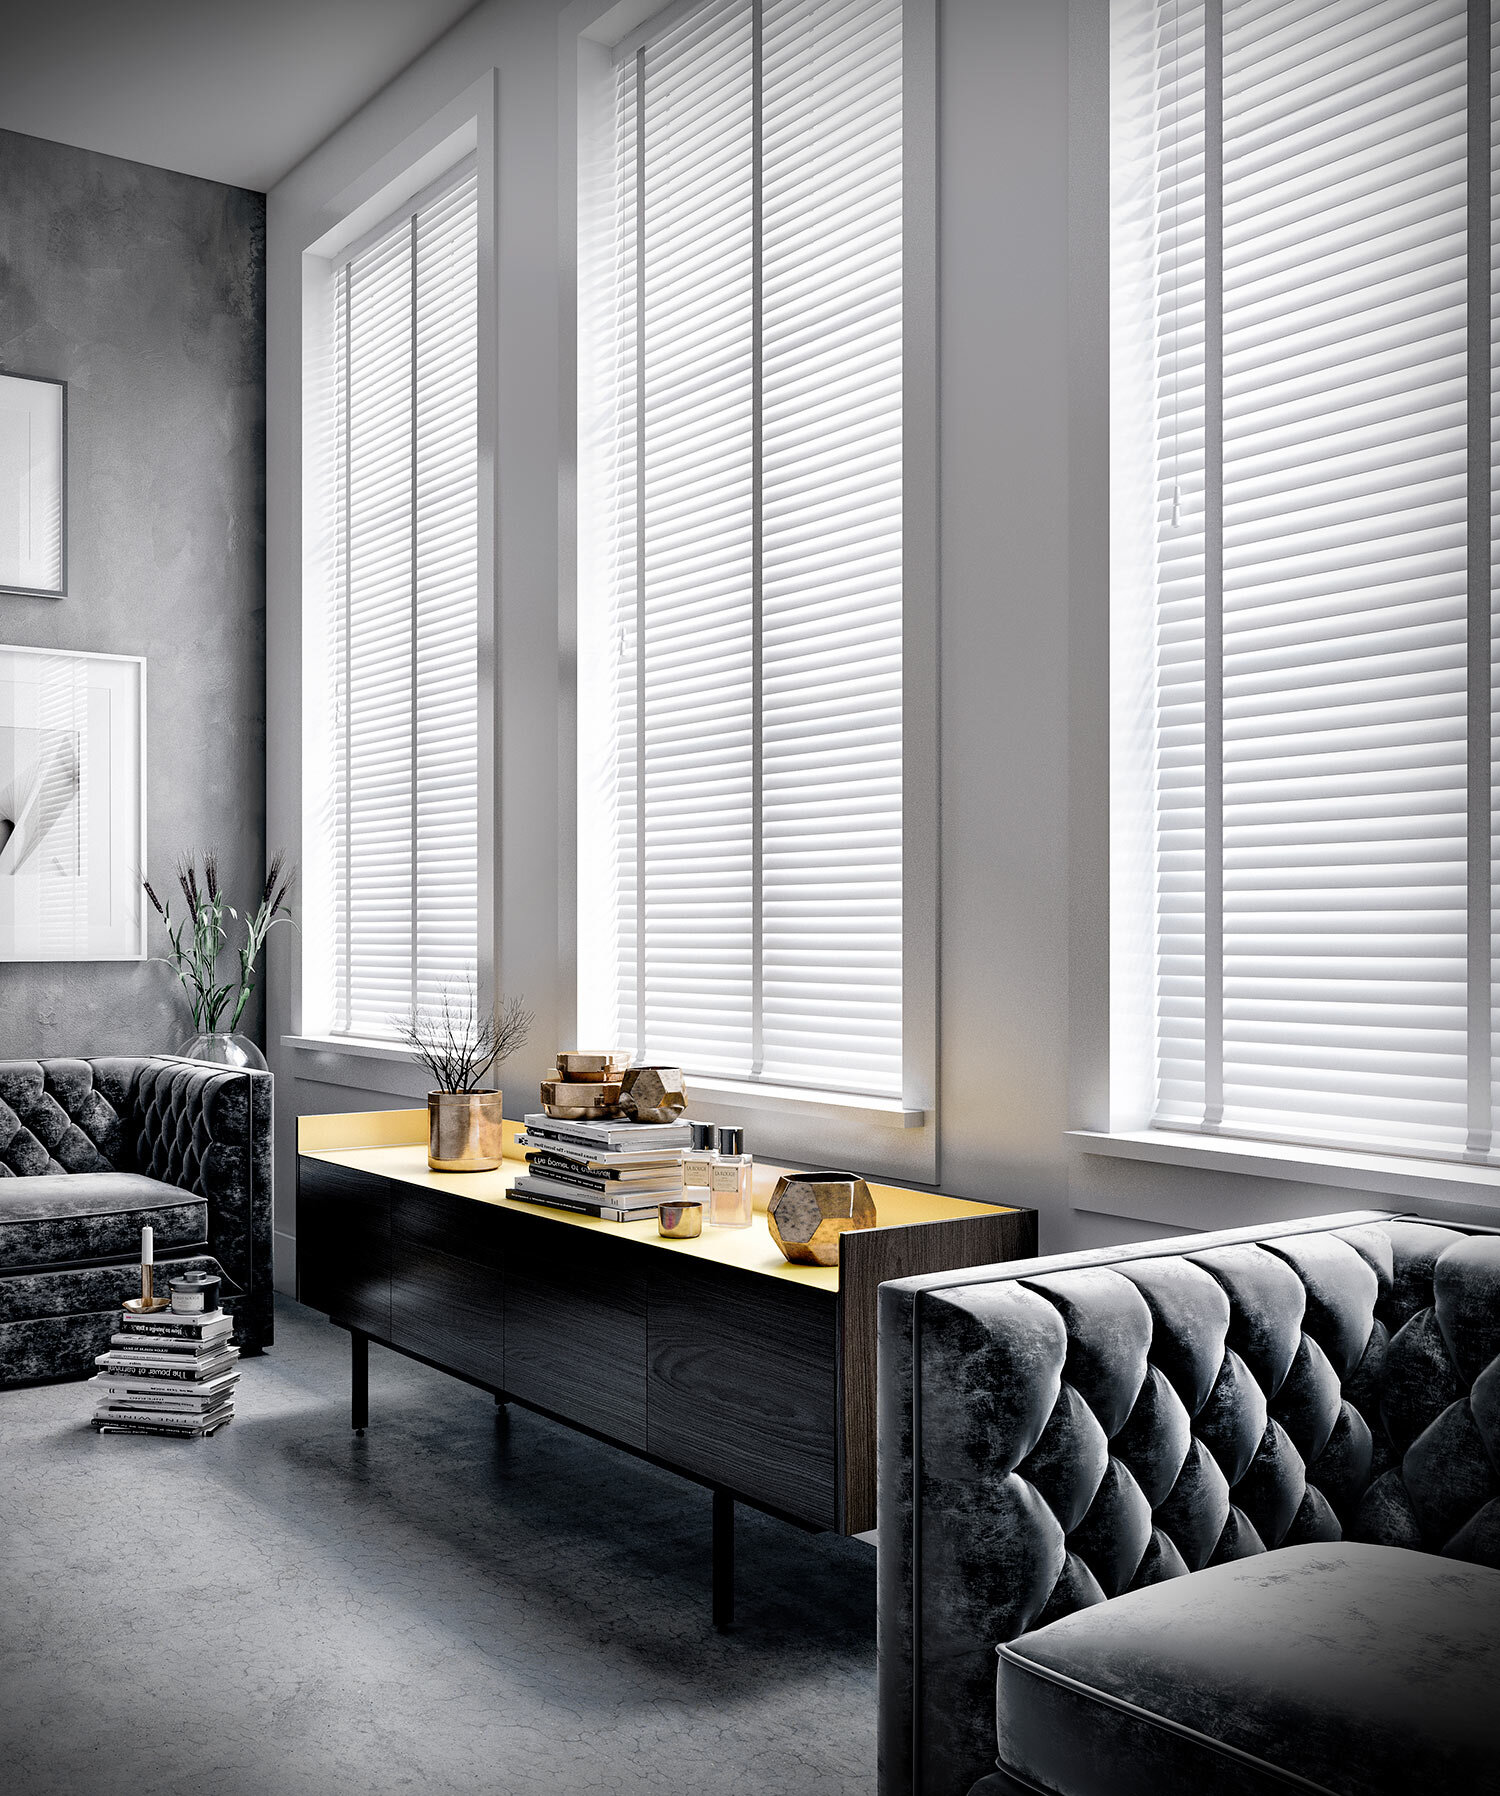 Electric Window Blinds Winchester. We motorise high quality rollers, venetians, honeycombe and zebra blinds. These can be mains powered or use a rechargeable lithium battery.